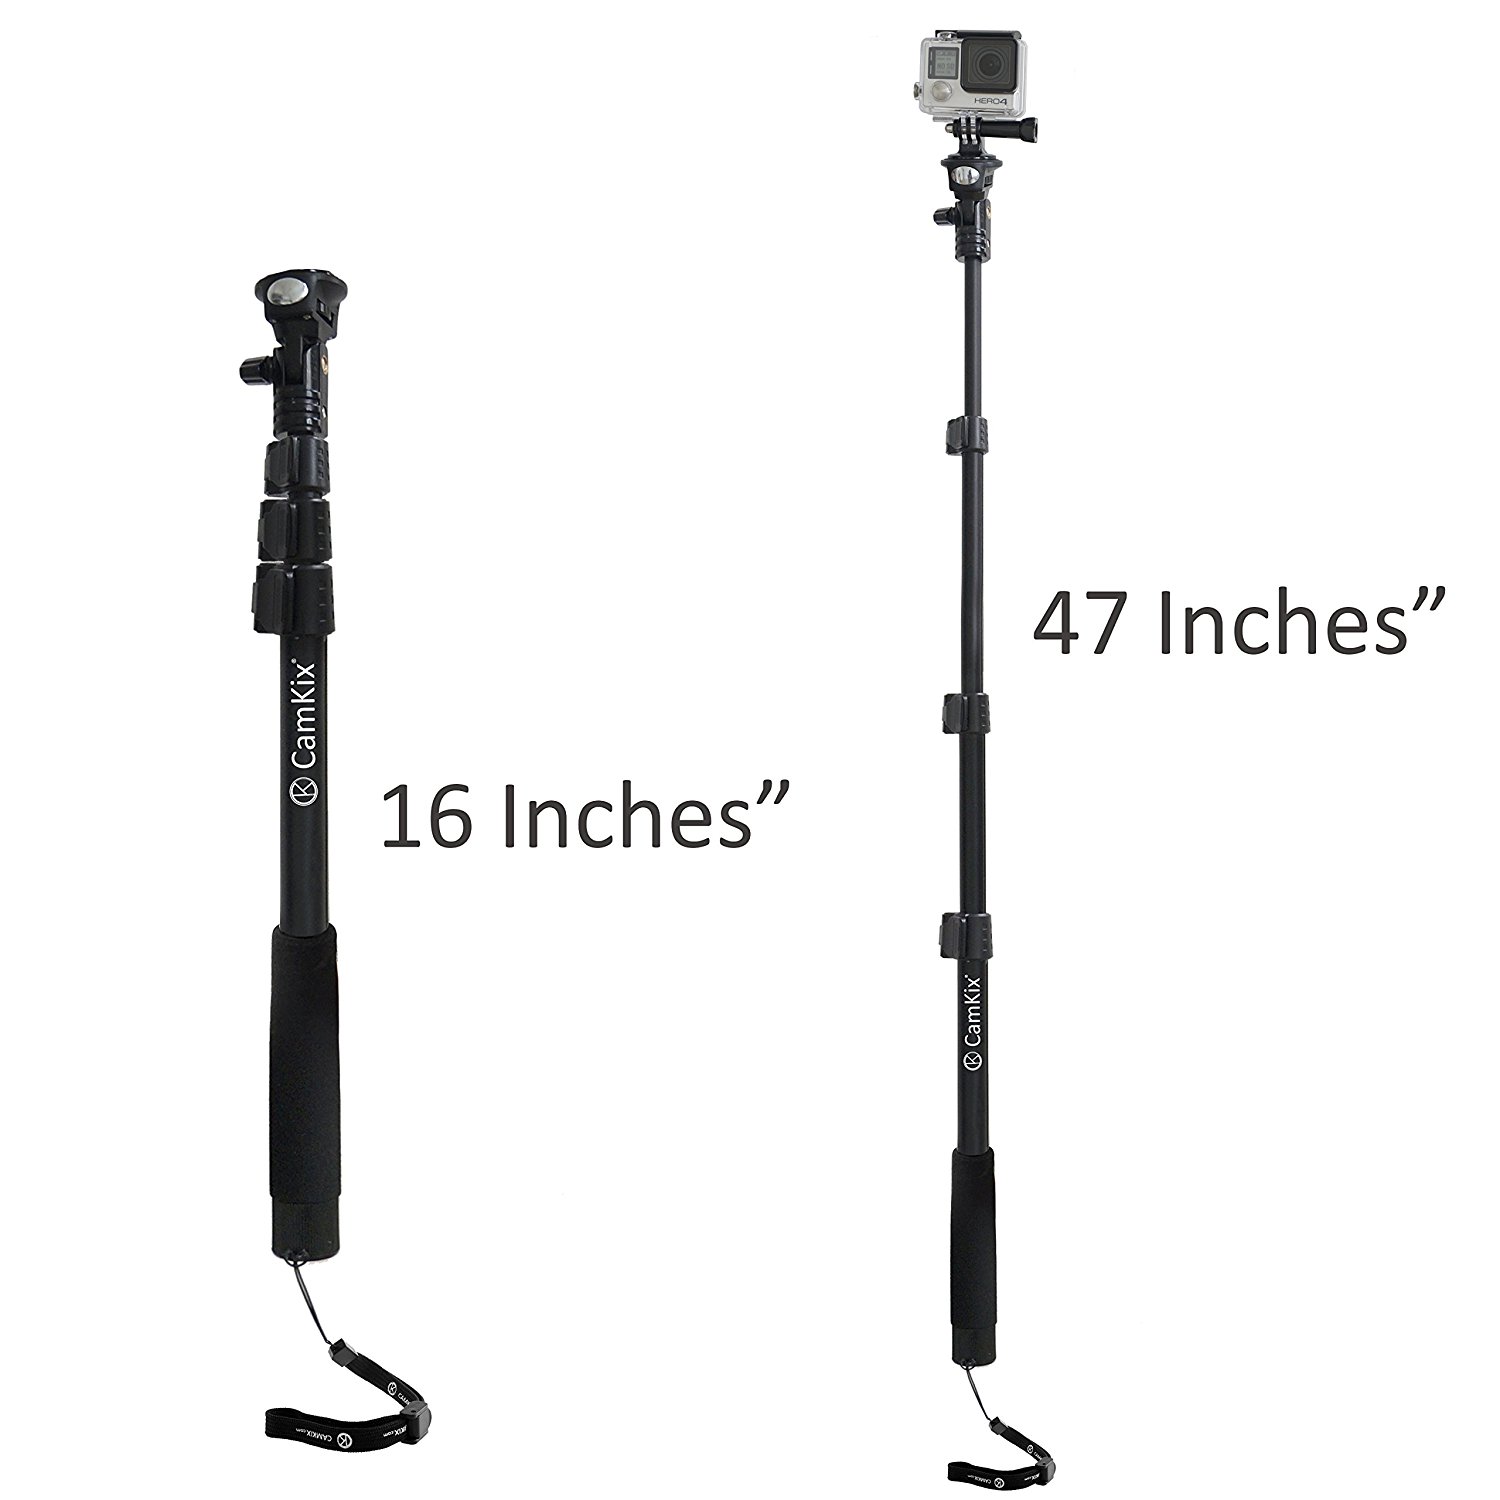 camkix premium telescopic pole 16 - 47 - for gopro hero 5 / 4, session, black, silver, hero+ lcd, 3+, 3, 2, 1, and compact cameras; and cell phones - with cradle for remote - strong and stable clip lo - image 3 of 8